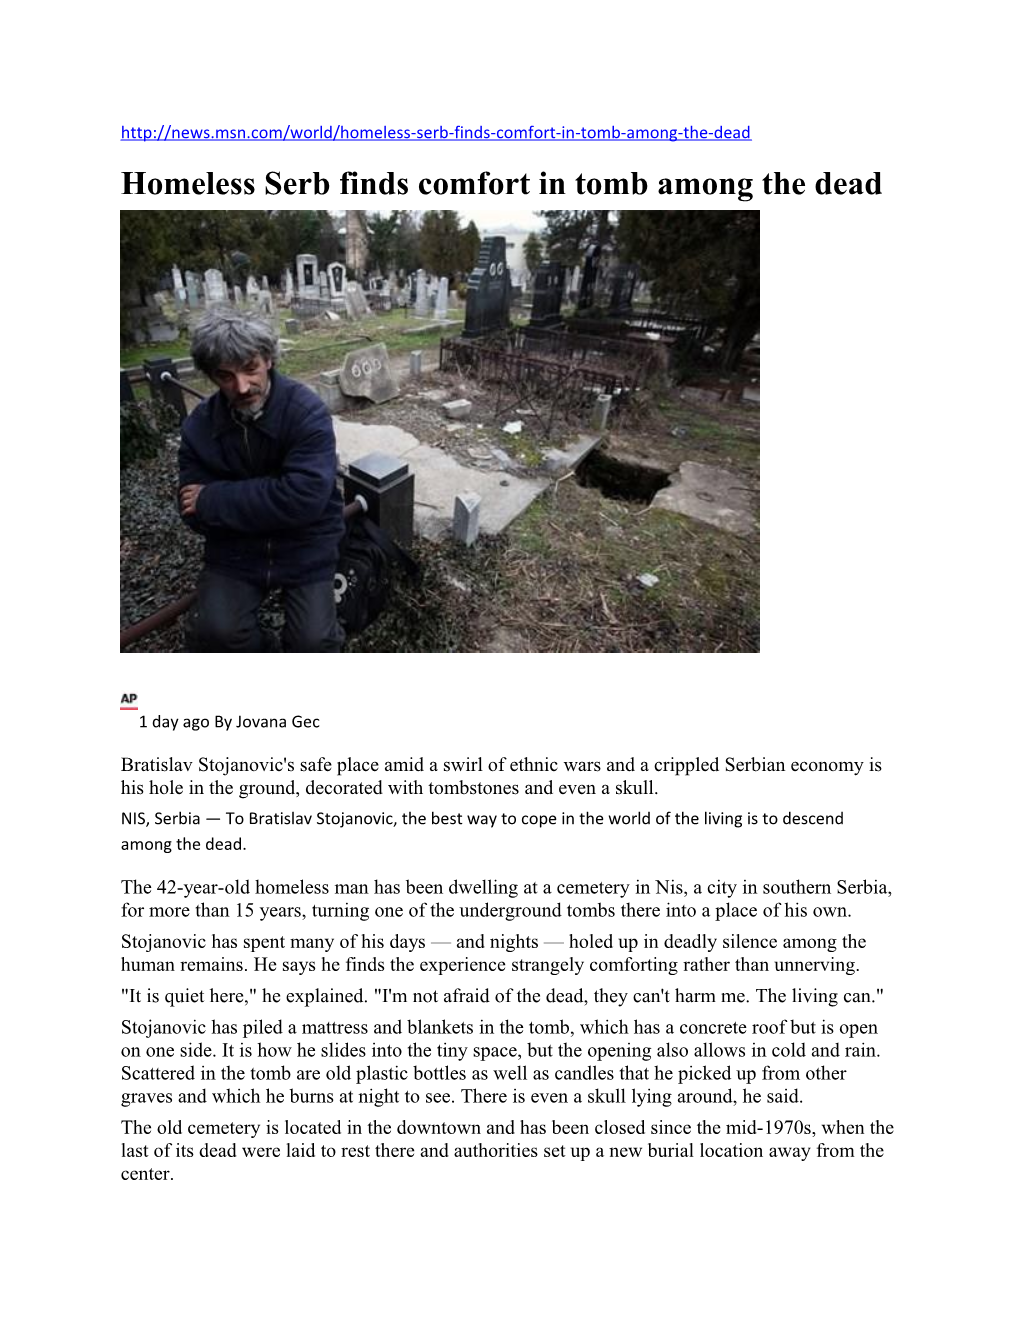 Homeless Serb Finds Comfort in Tomb Among the Dead